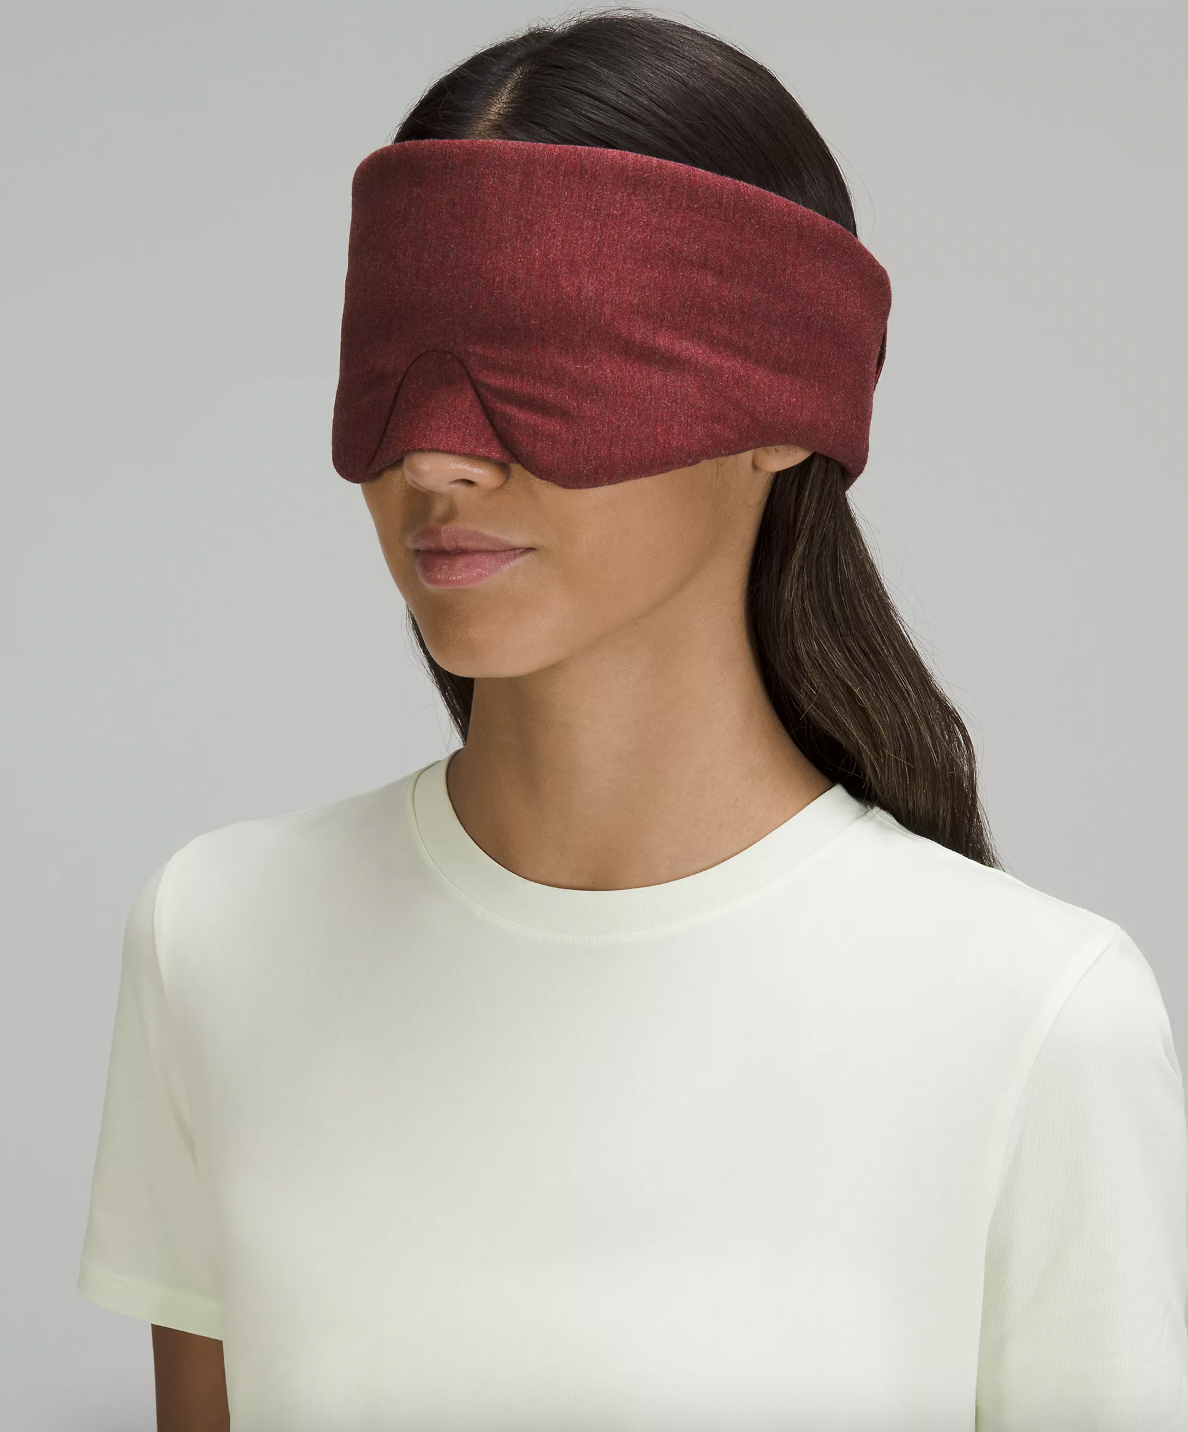 a person wearing the padded eye mask over their face